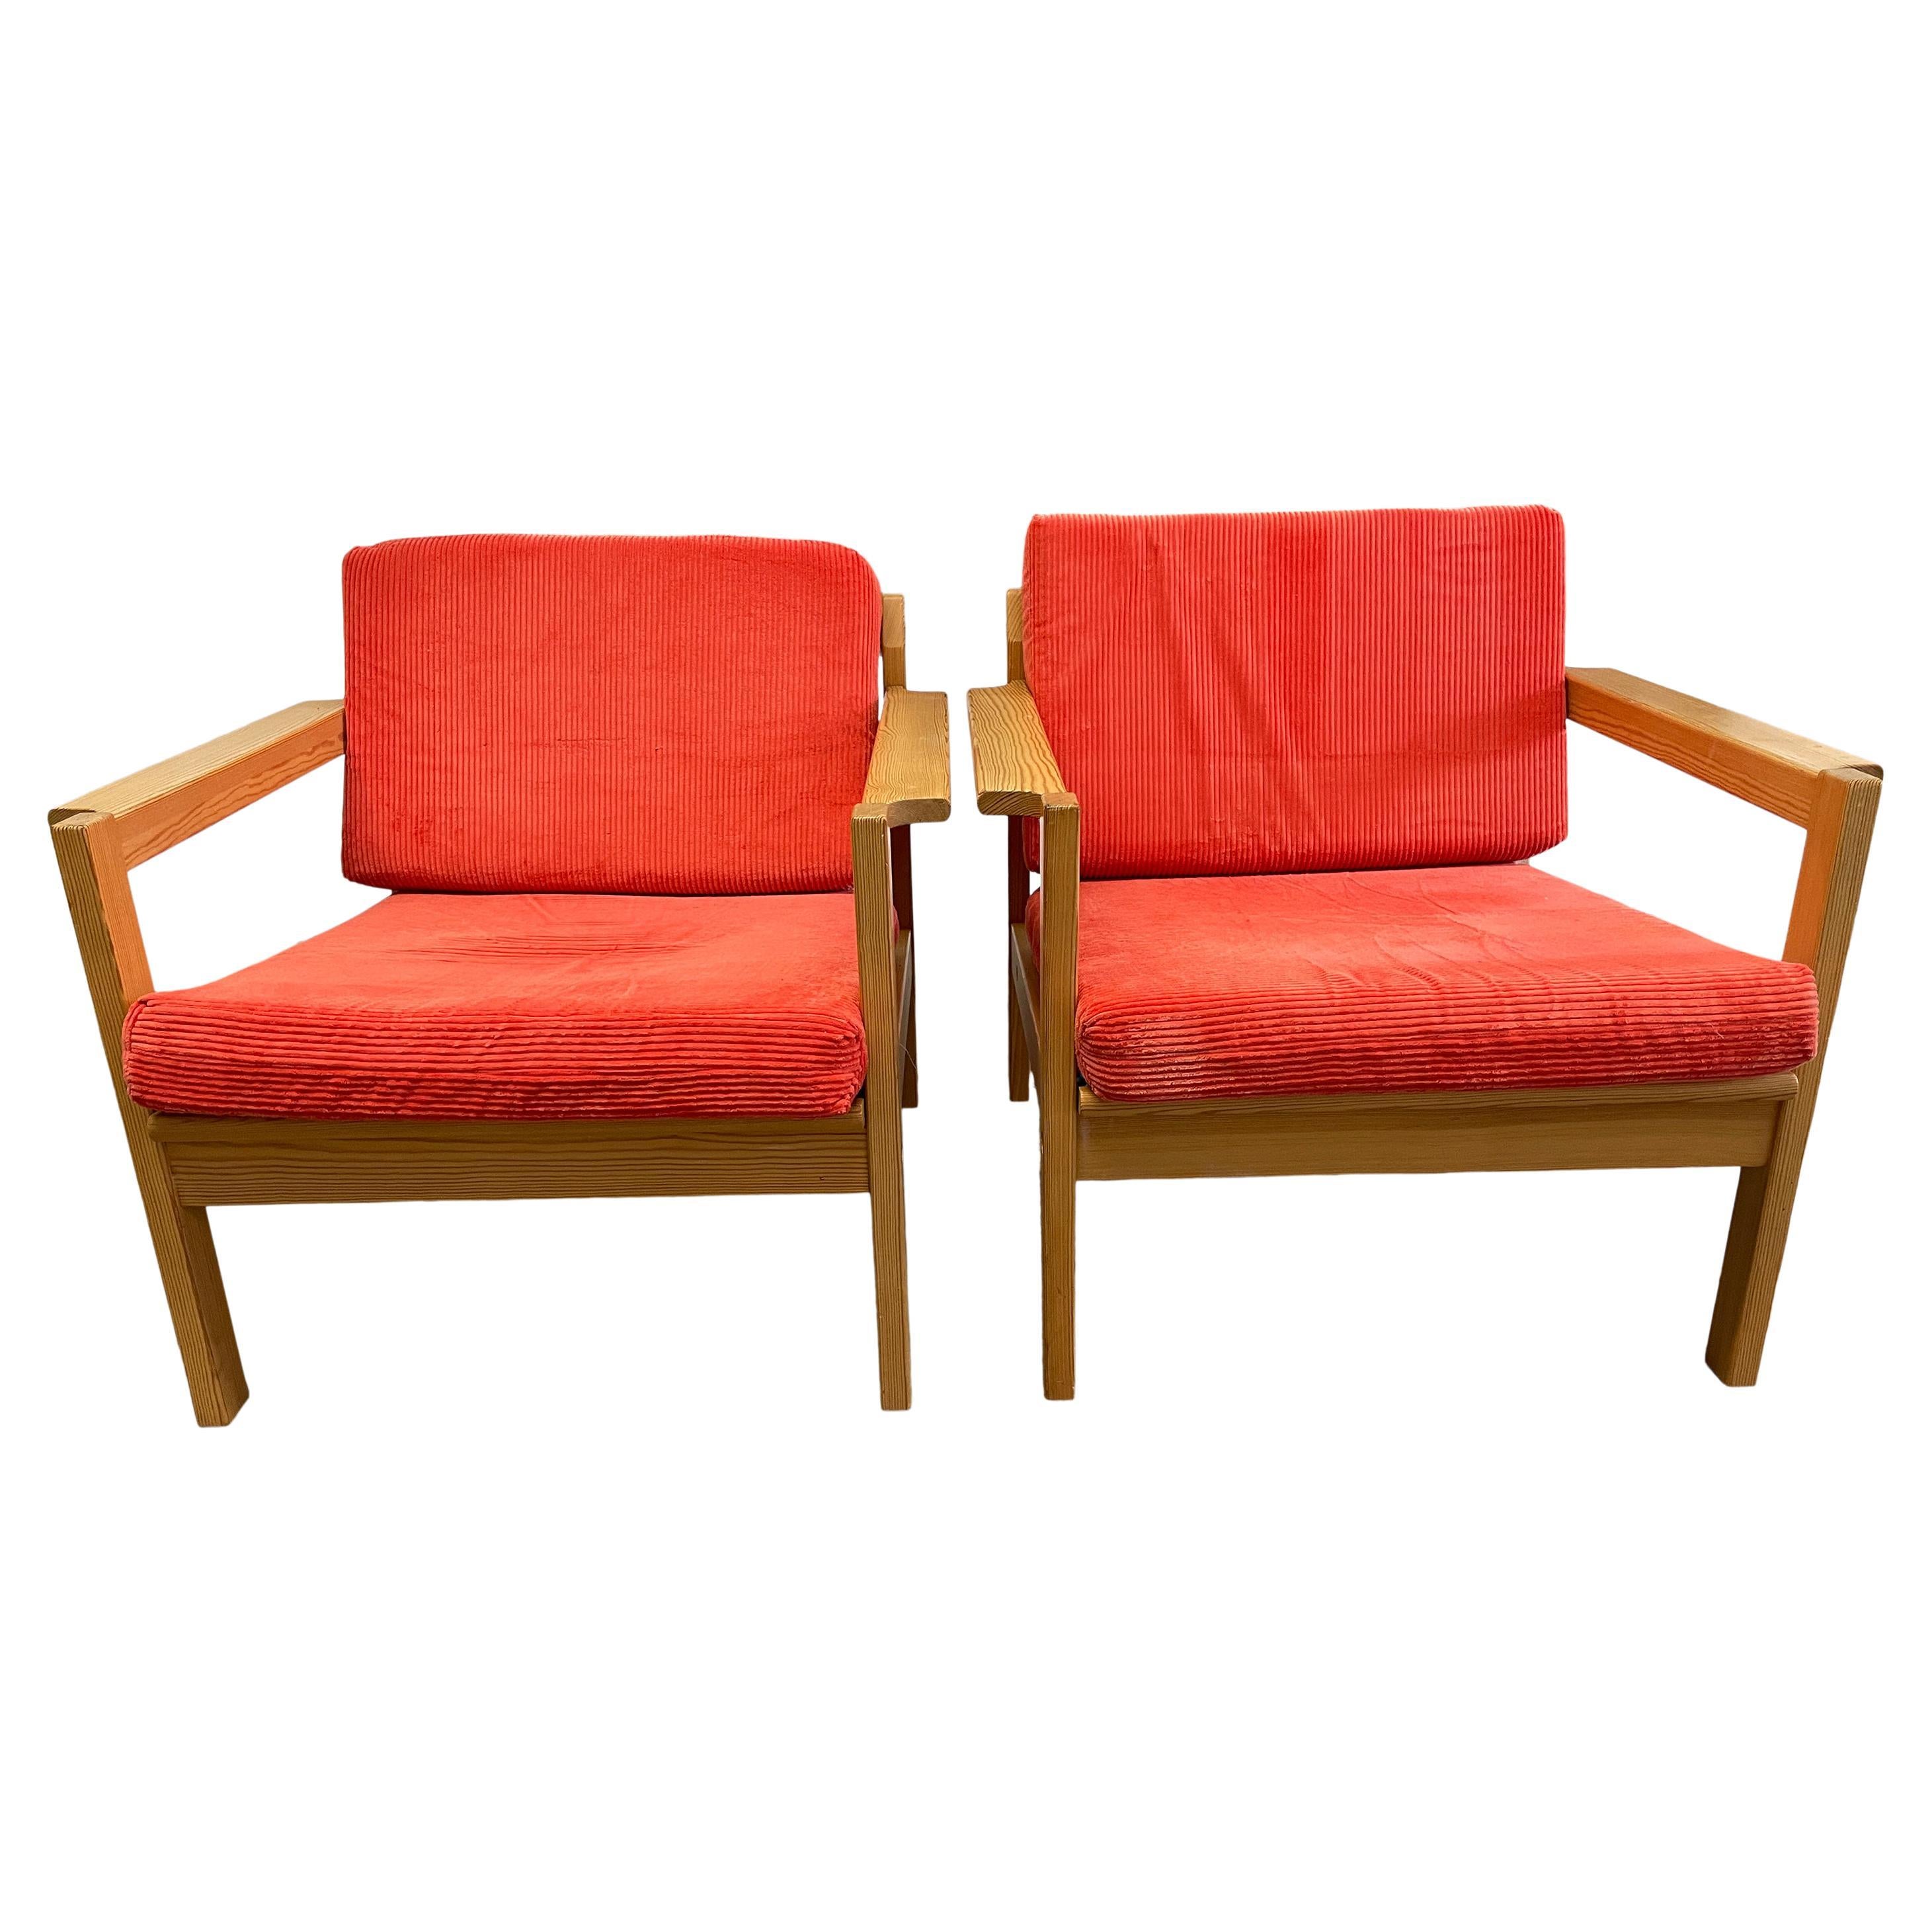 Pair of original rare Swedish all blonde low lounge chairs with orange/red corduroy upholstery. Solid birch bentwood frames with slatted back and all new wool peach upholstery. Original vintage condition. Frames are solid birch. Made In Sweden. Very